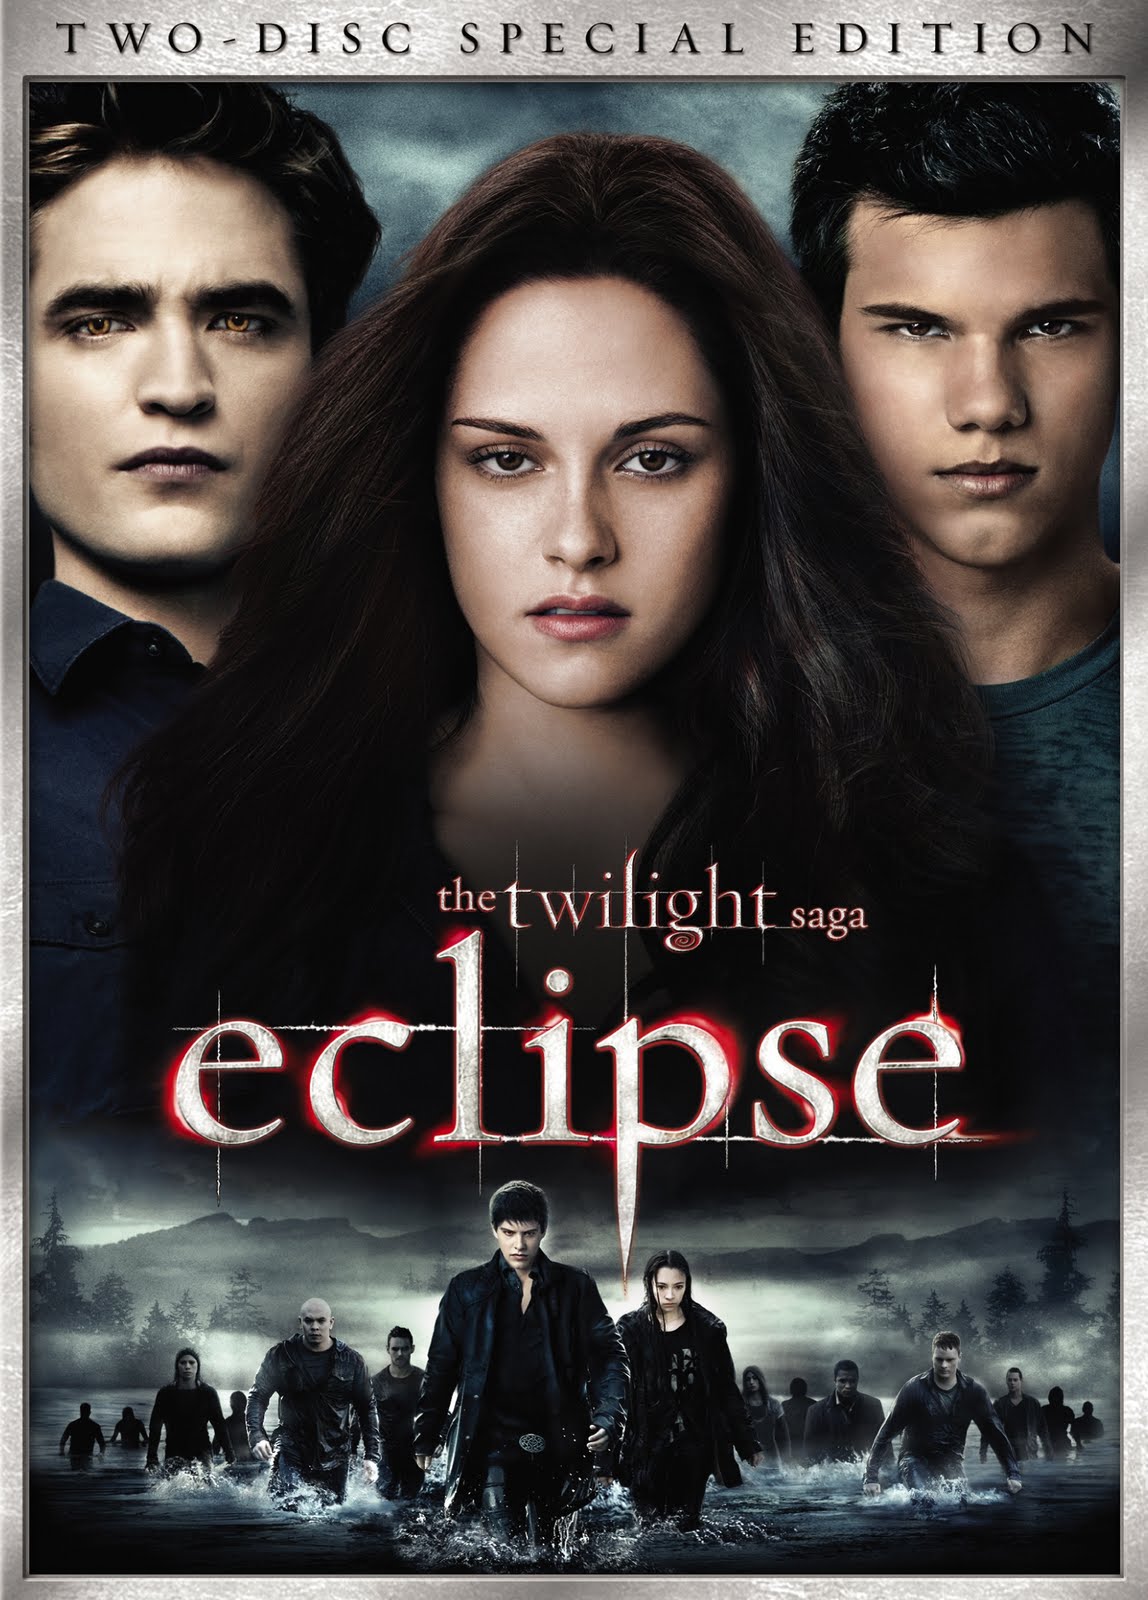 DVD/Blu-ray Cover - Twilight:Eclipse Two Disc Special Edition DVD - Beautiful Jodelle ...1148 x 1600